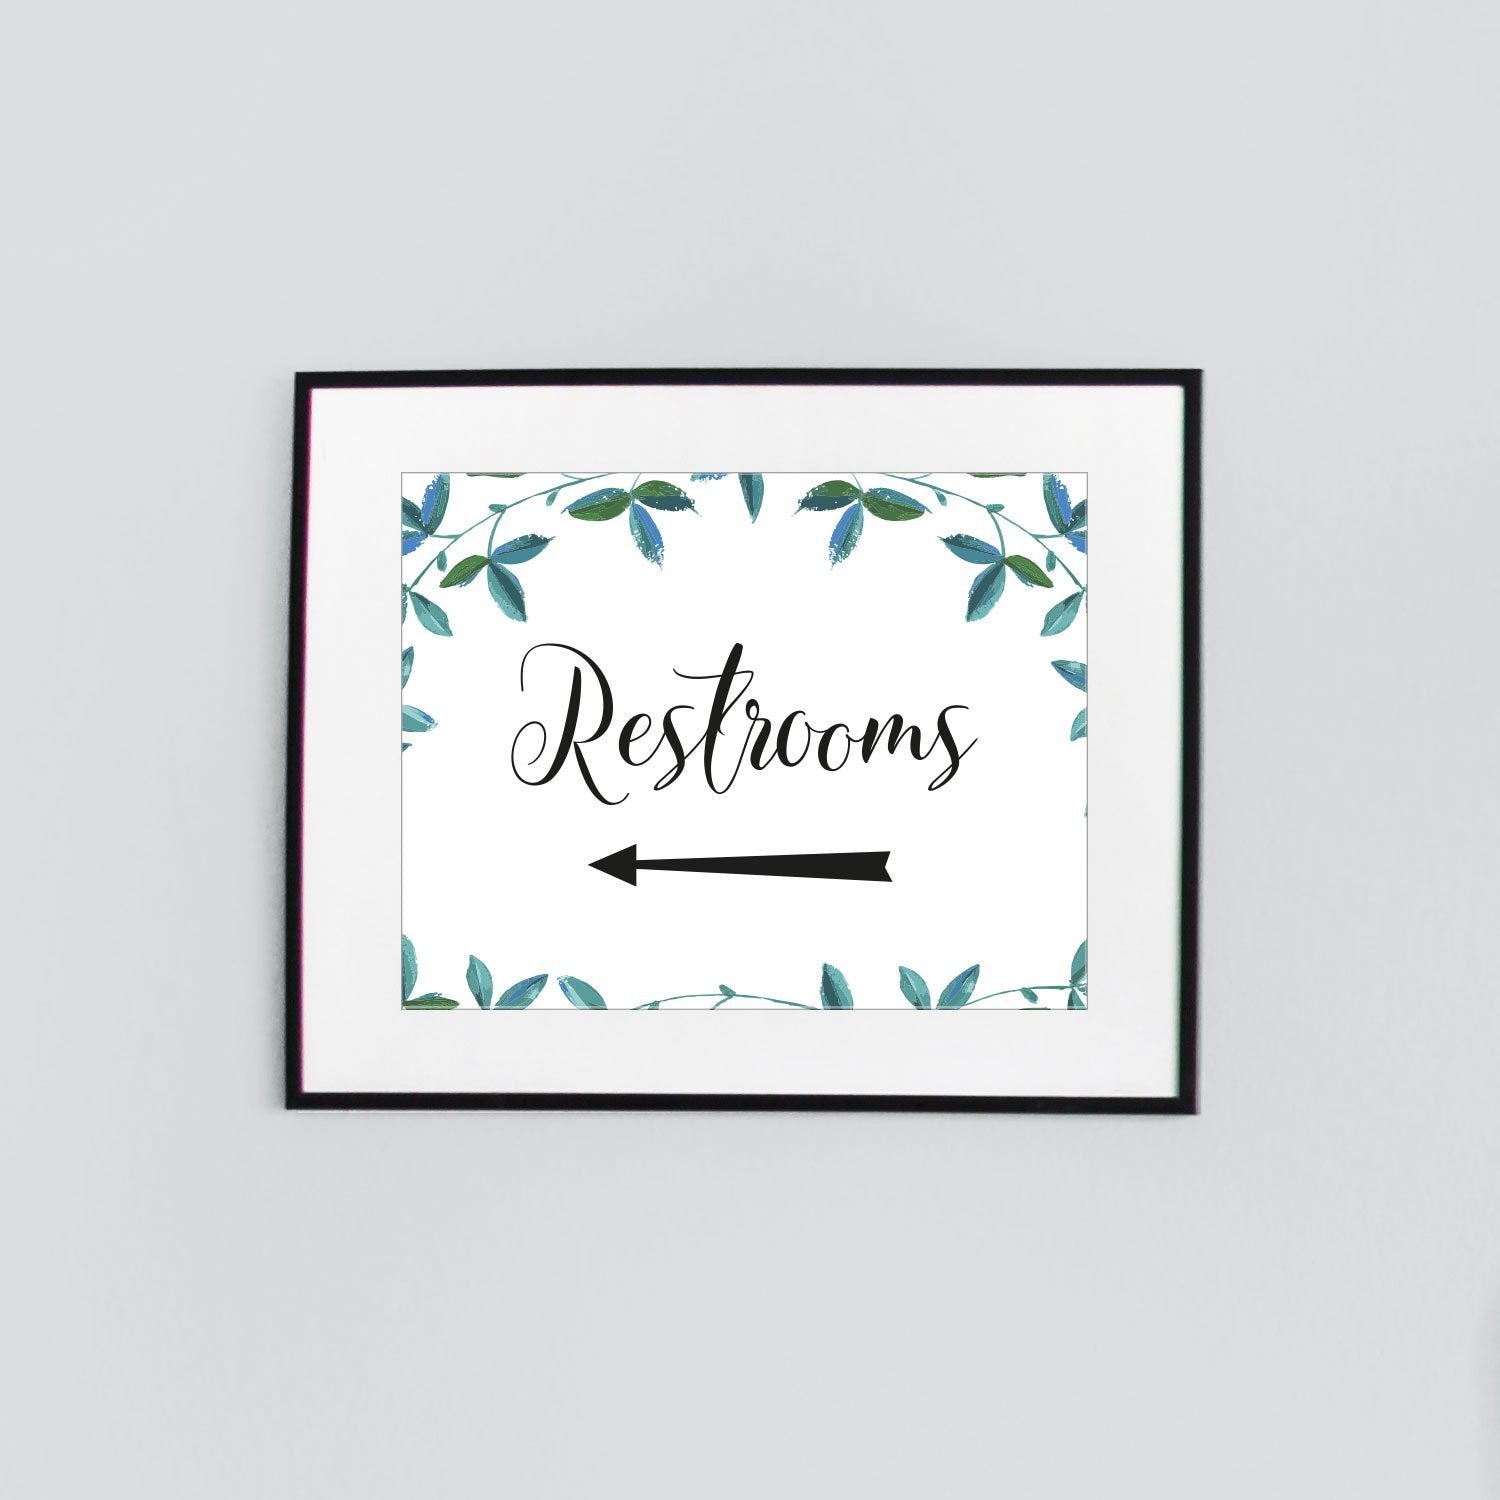 restrooms this way left arrow wedding sign with green foliage design